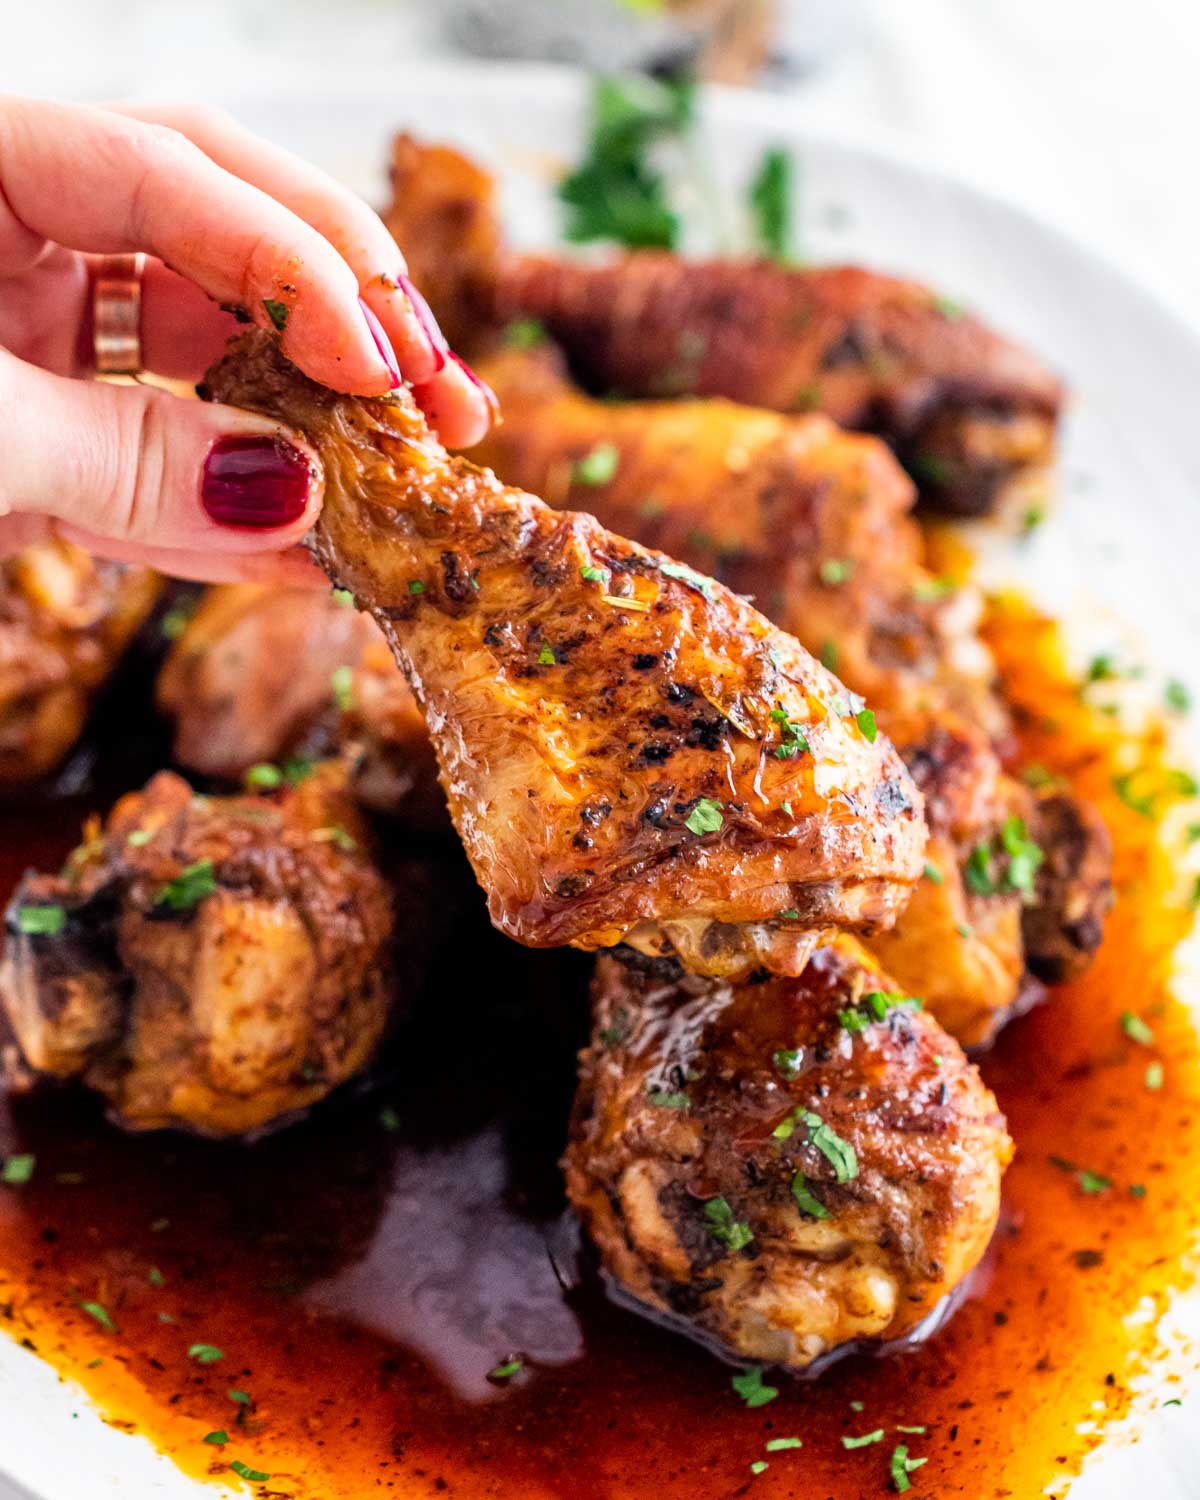 a hand holding an oven baked chicken drumstick above a platter.